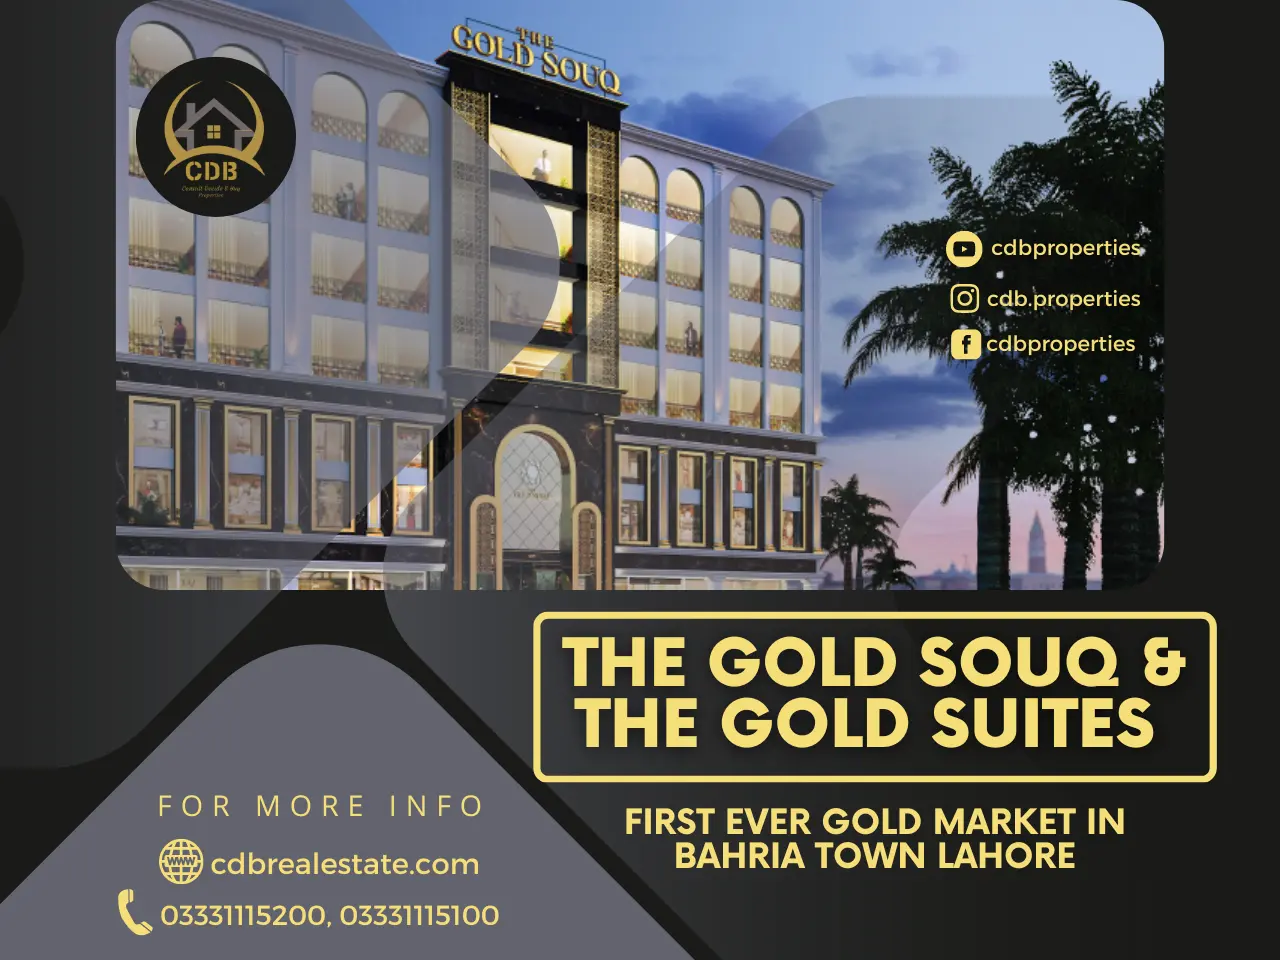 The Gold Souq The Gold Suites in Bahria Town Lahore